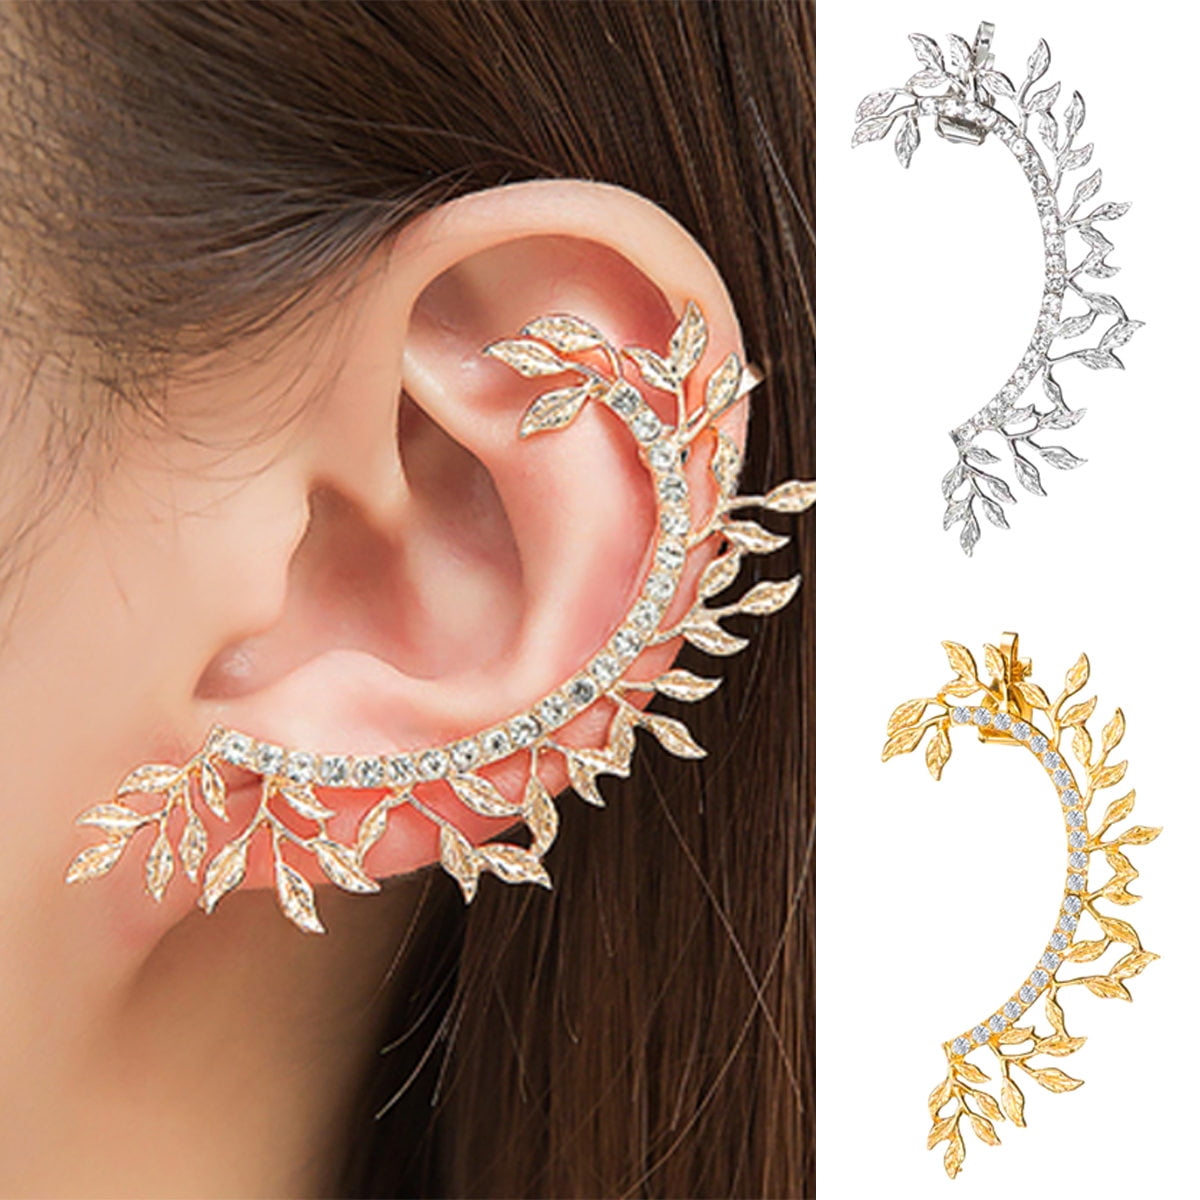 Ear Charms Delicate Leaf Flower and CZ Rhodium on Silver Long Wave Ear Cuff Earring Wraps